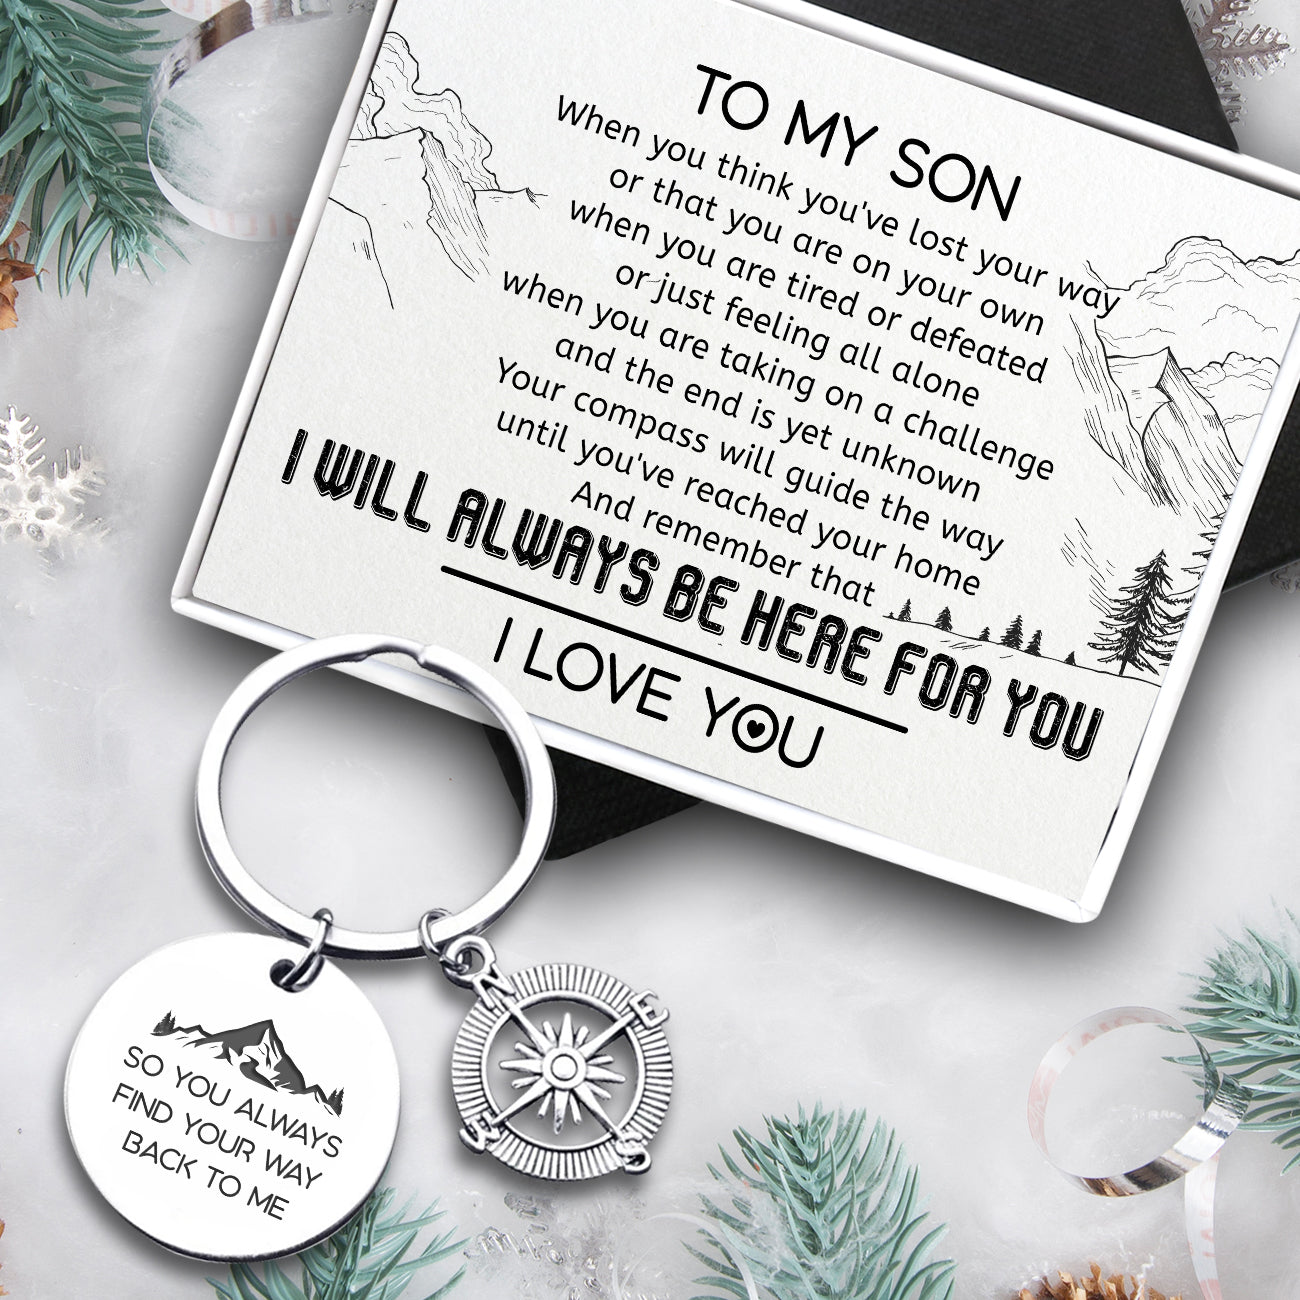 Compass Keychain - Travel - To My Son - Your Compass Will Guide The Way - Ukgkw16007